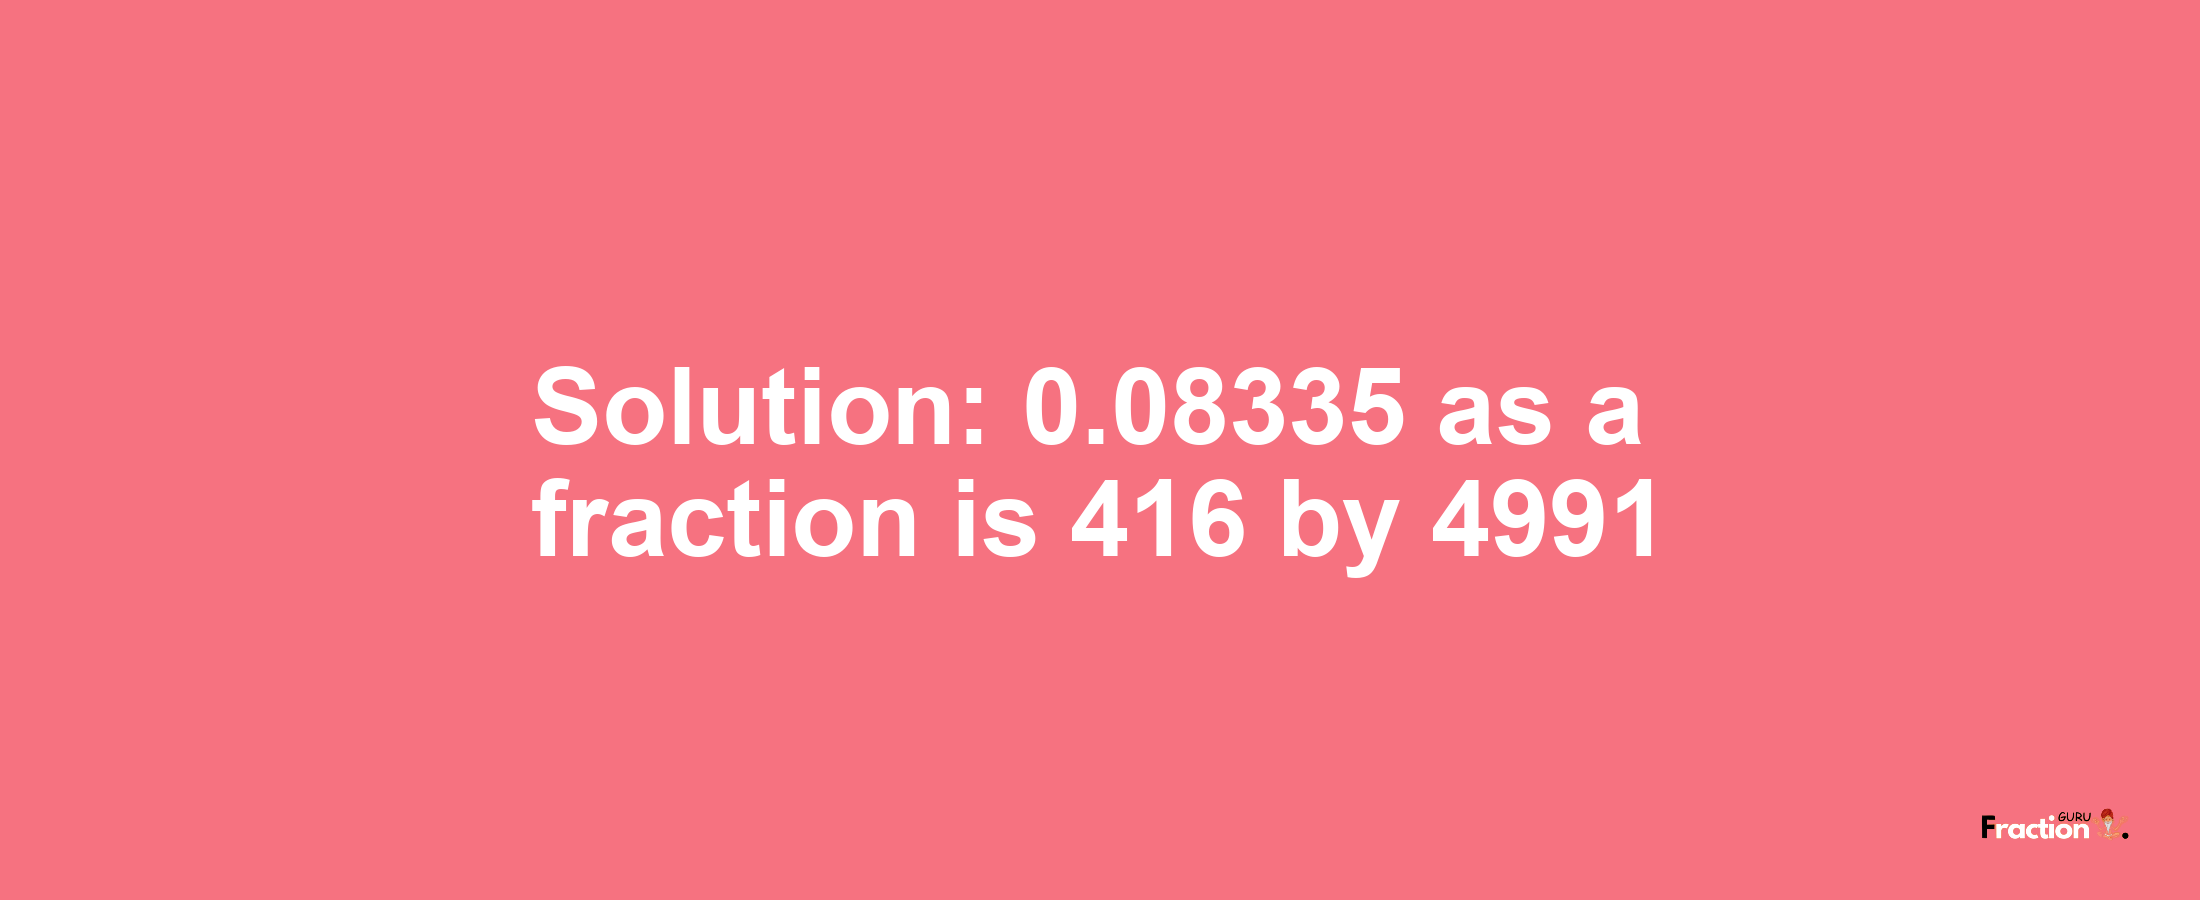 Solution:0.08335 as a fraction is 416/4991